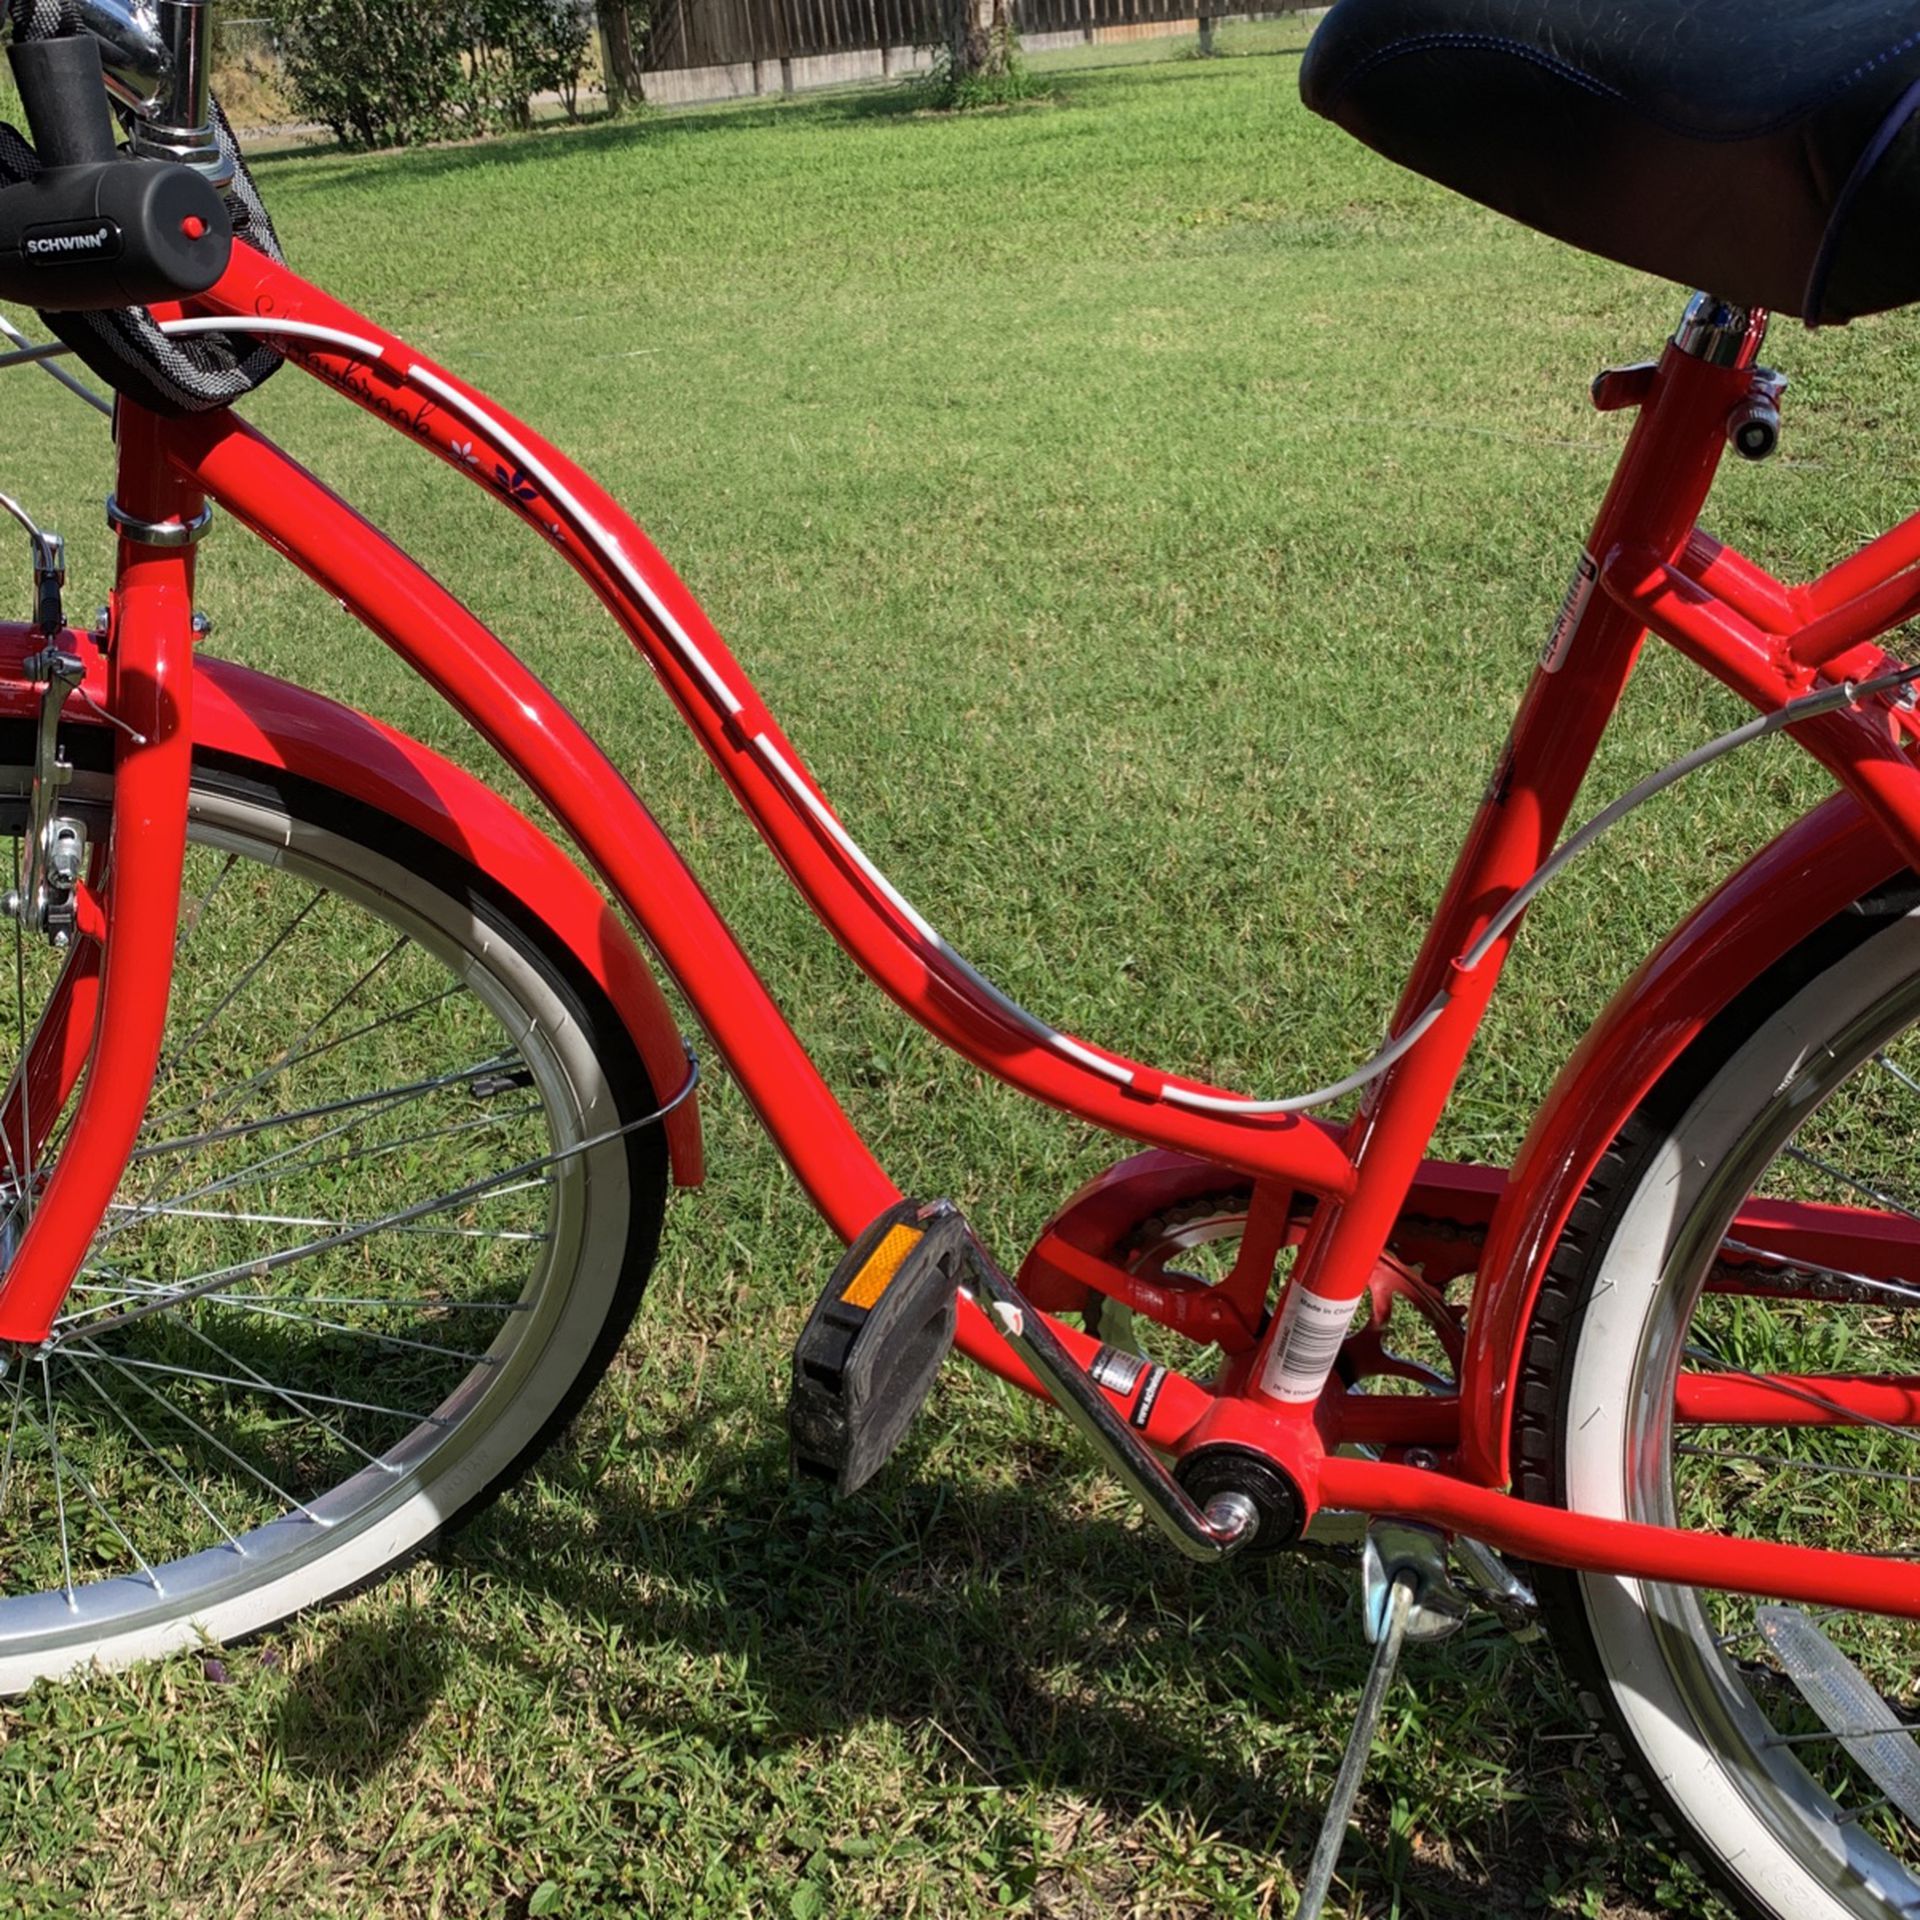 Brand New Schwinn Cruiser With Shift Gears And Chain Lock With 2 Keys